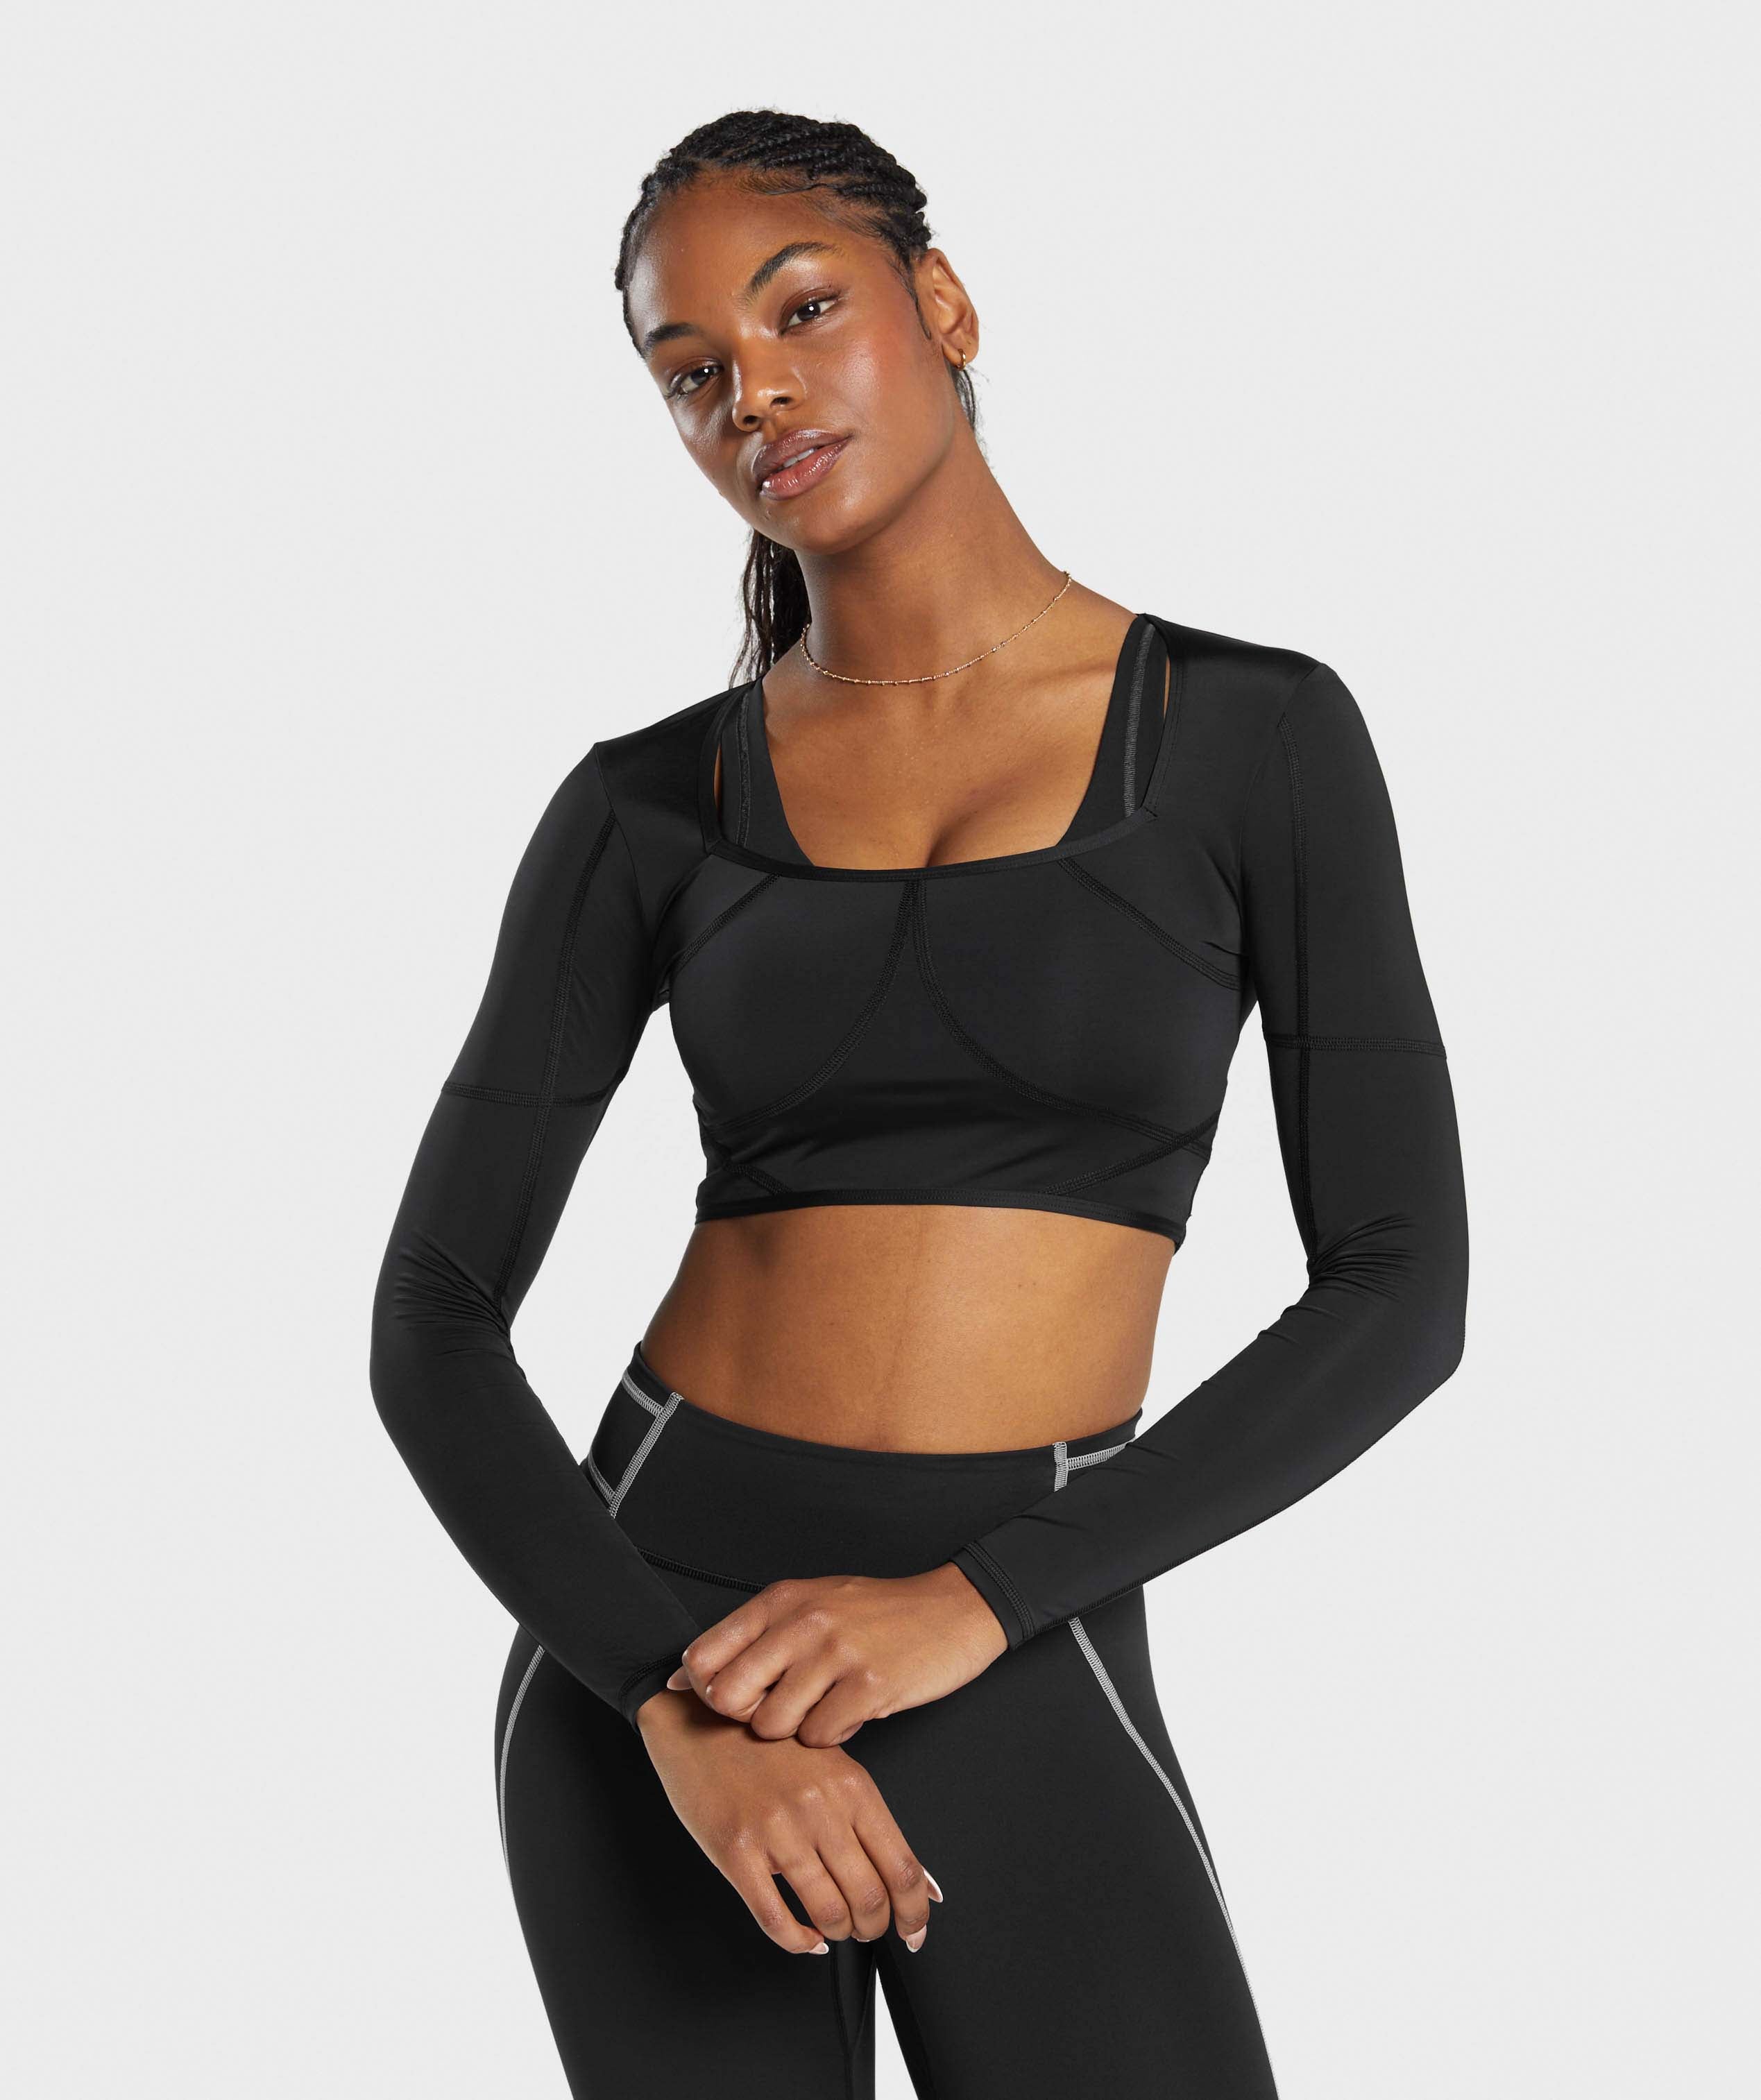 Stitch Feature Long Sleeve Crop Top in Black/Stock Black Marl - view 1